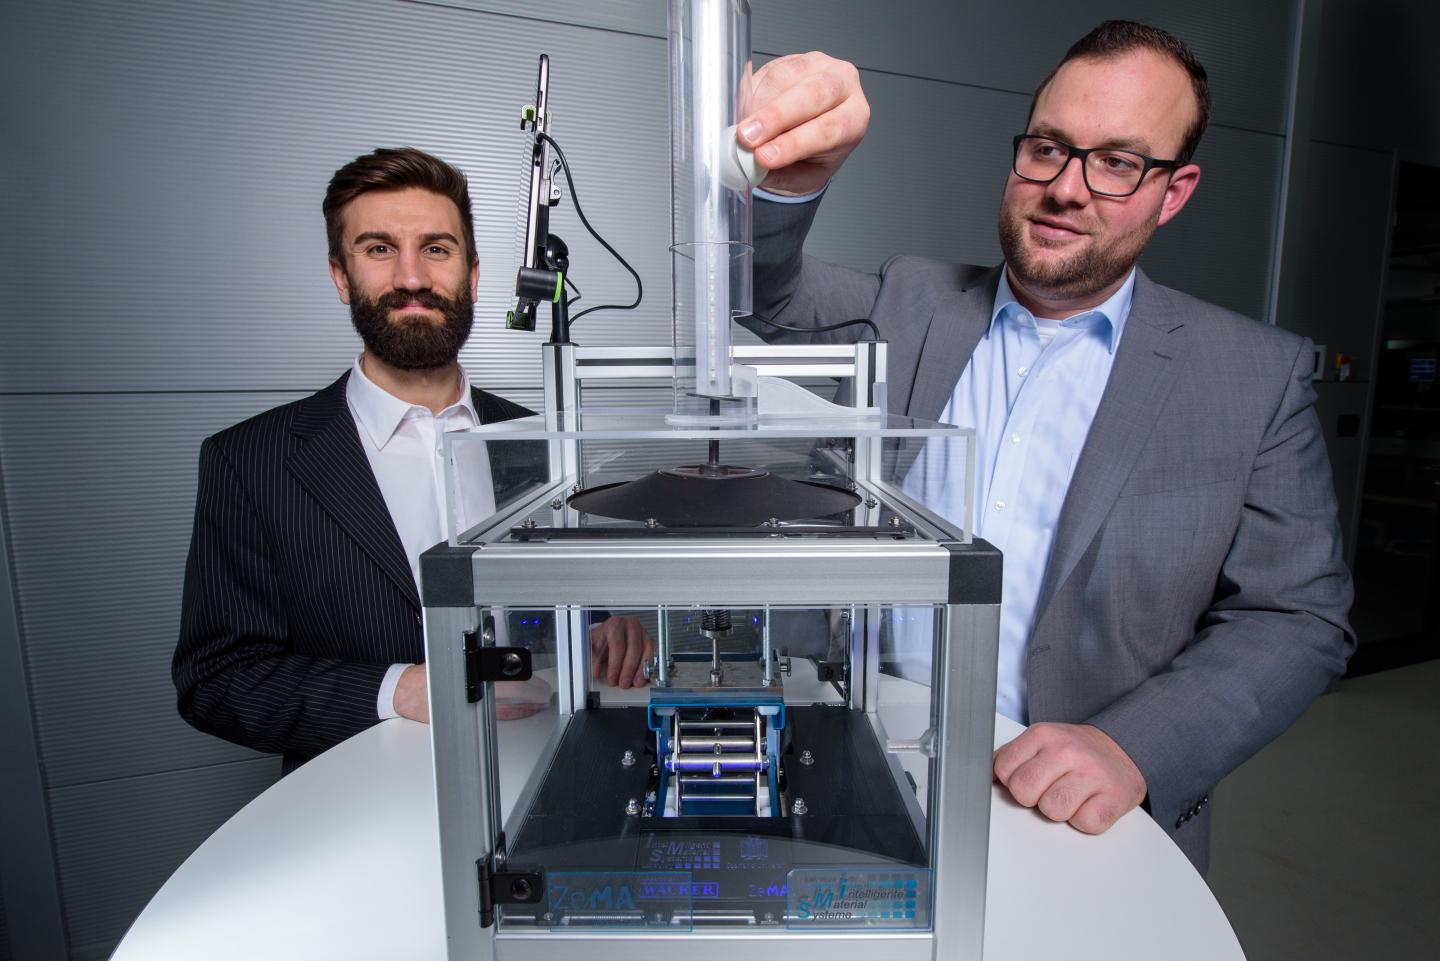 Hannover Messe: Engineers at Saarland University Turn Polymer Films into Self-Sensing High-Tech